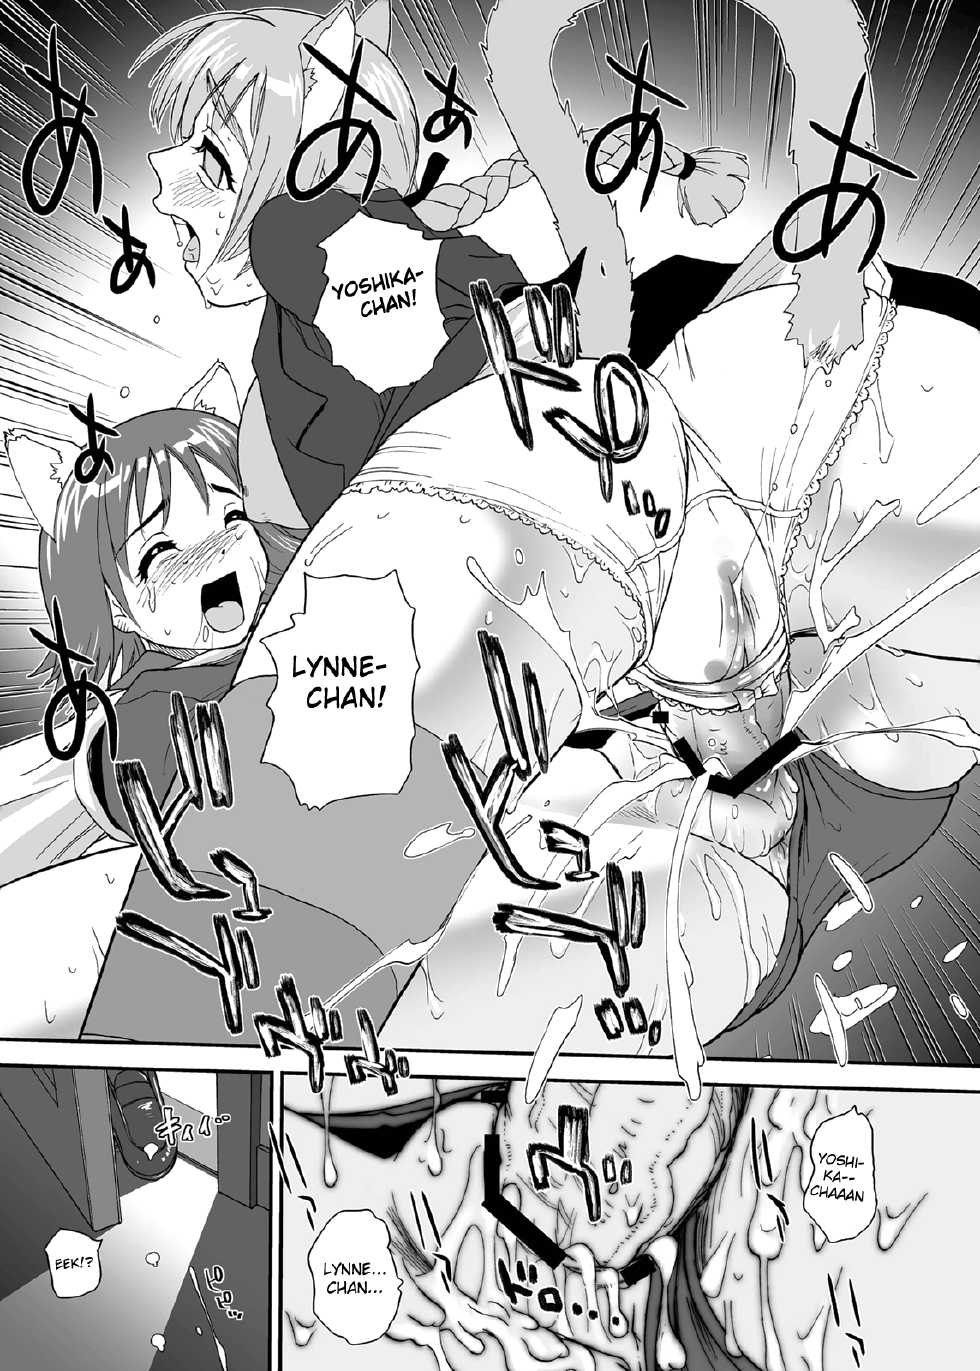 [Behind Moon (Q)] Chin ★ ja Naikara Hazukashiku Naimon!!! | It's Not A Real Dick, So There's Nothing to Be Embarrassed About!!! (Strike Witches) [English] [ProjectHumpMe!Scanlations] [Digital] - Page 17